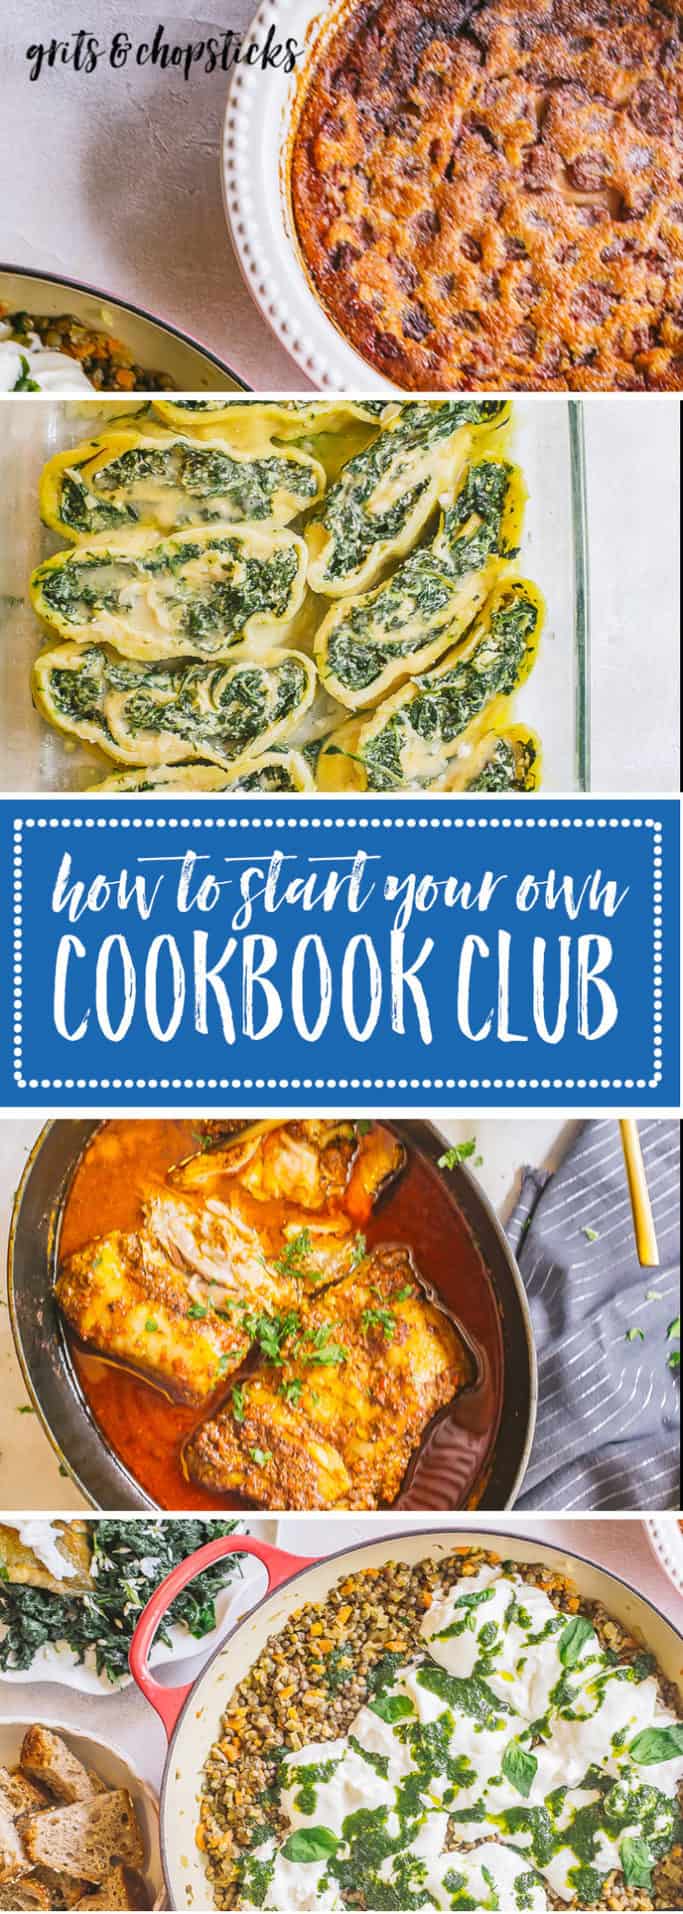 How to start your own cookbook club